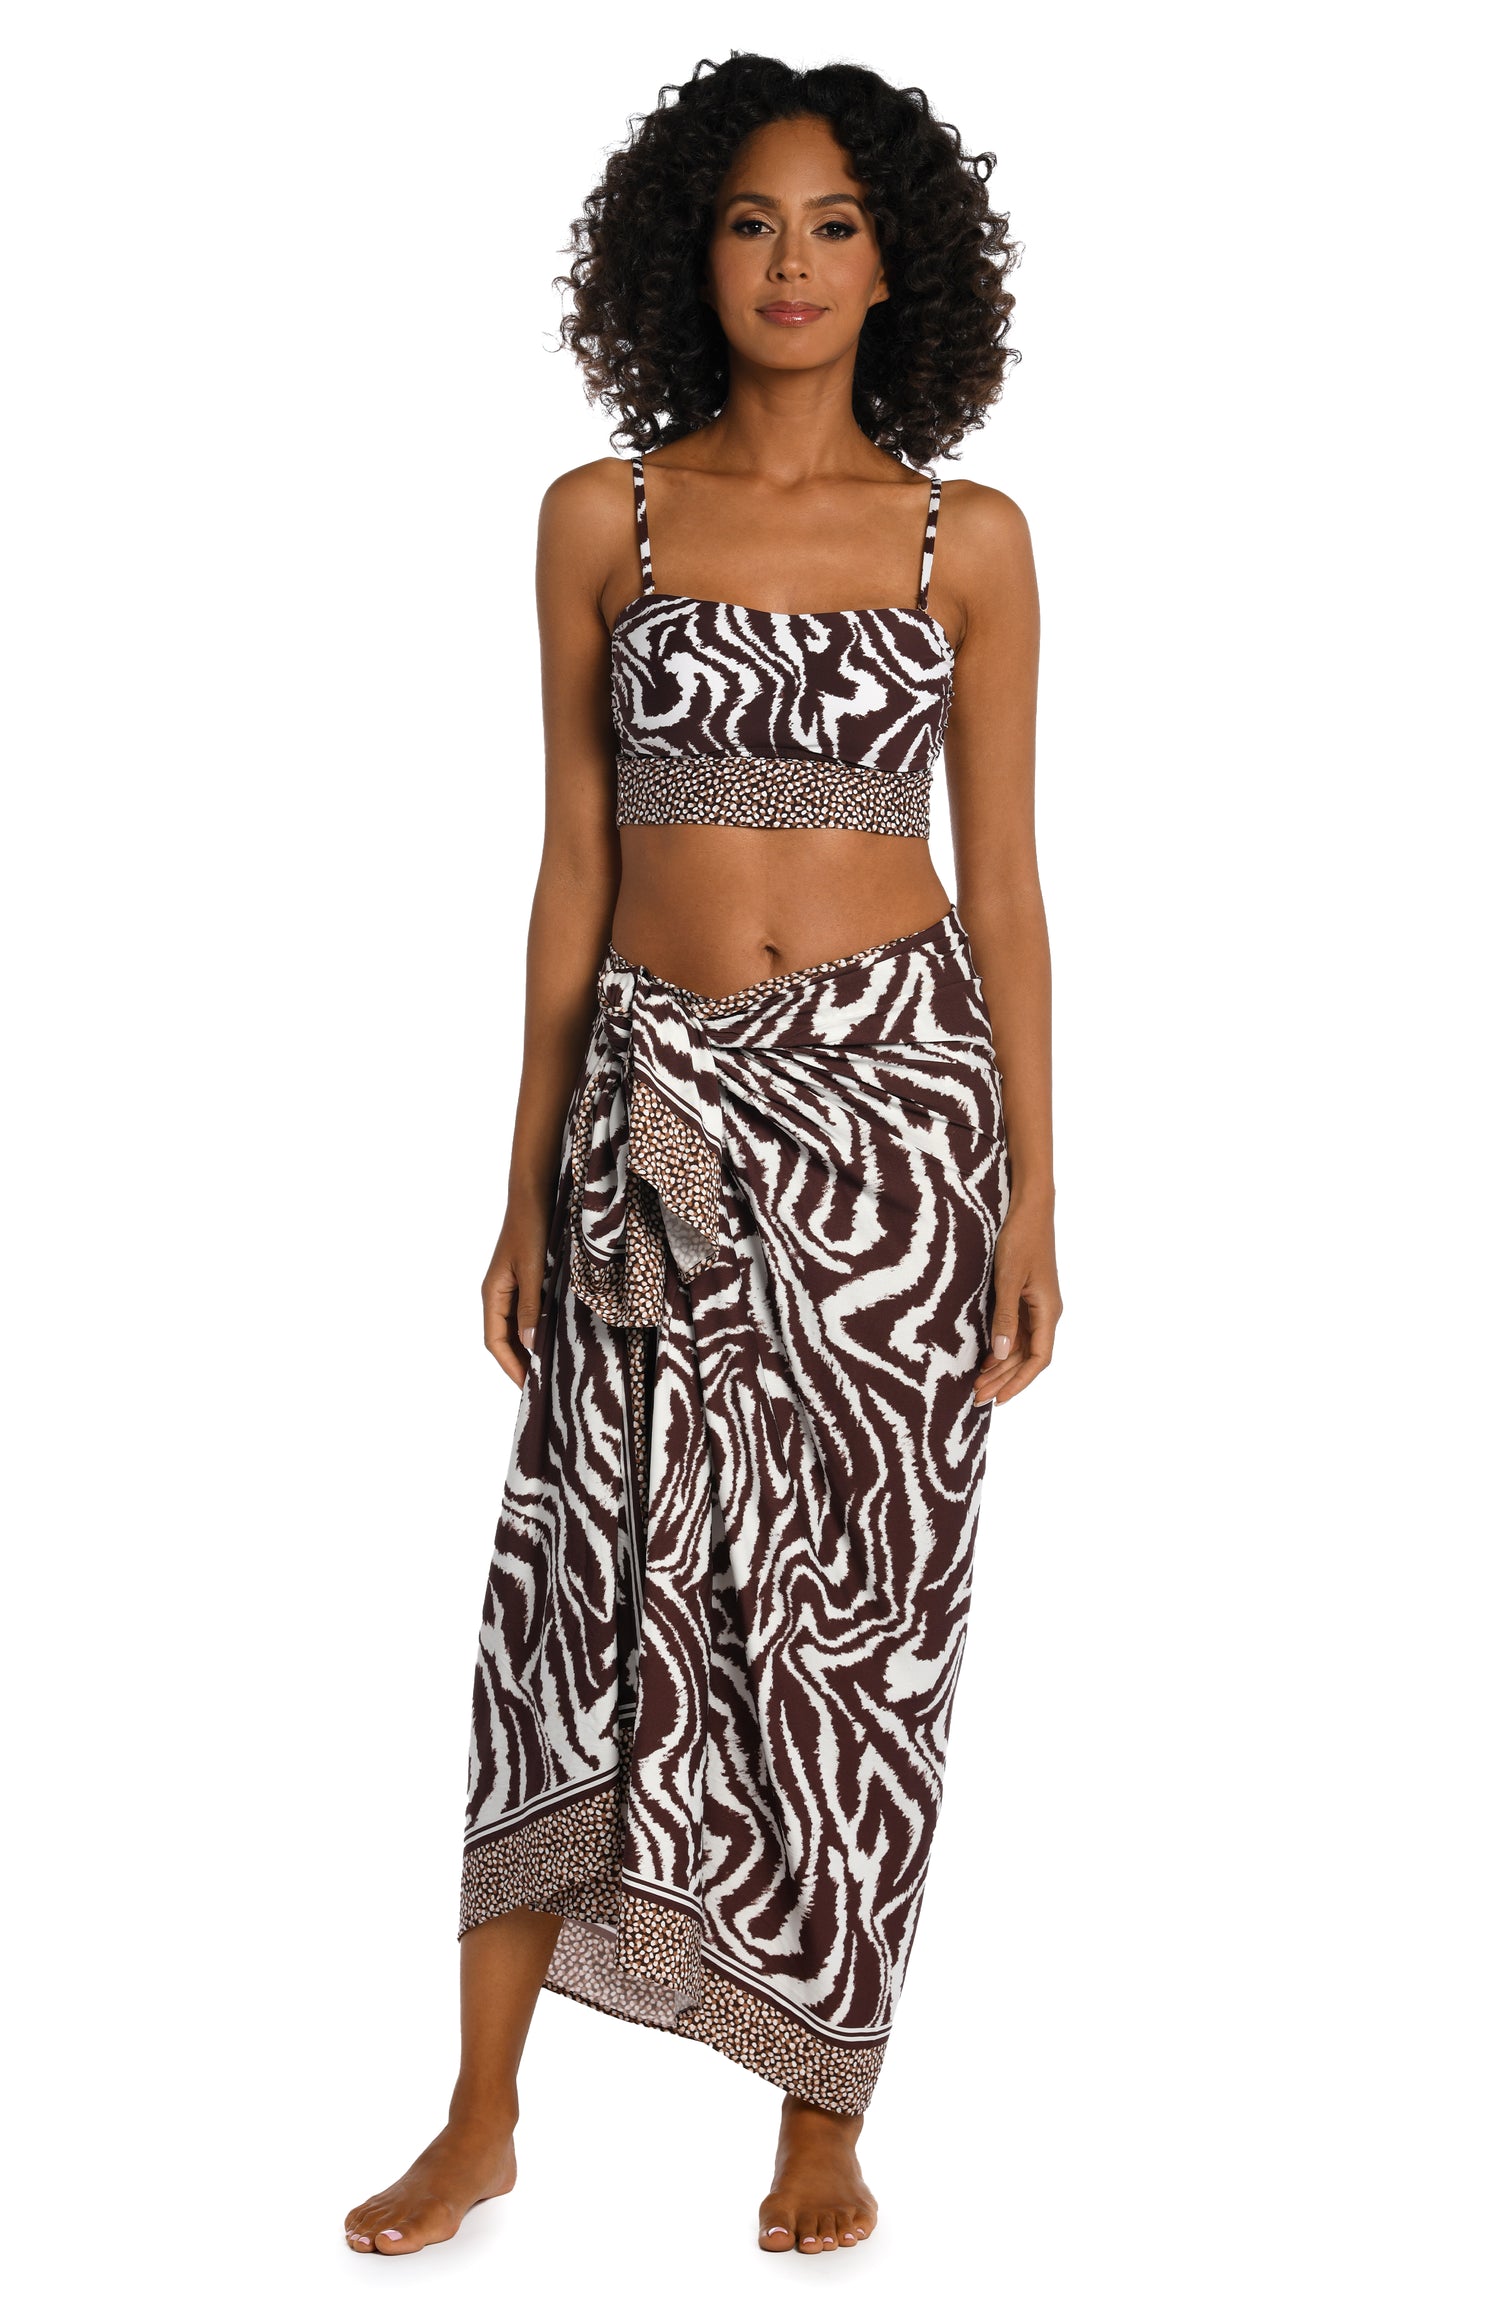 Model is wearing a java colored animal printed pareo wrap cover up in our Fierce Lines collection!